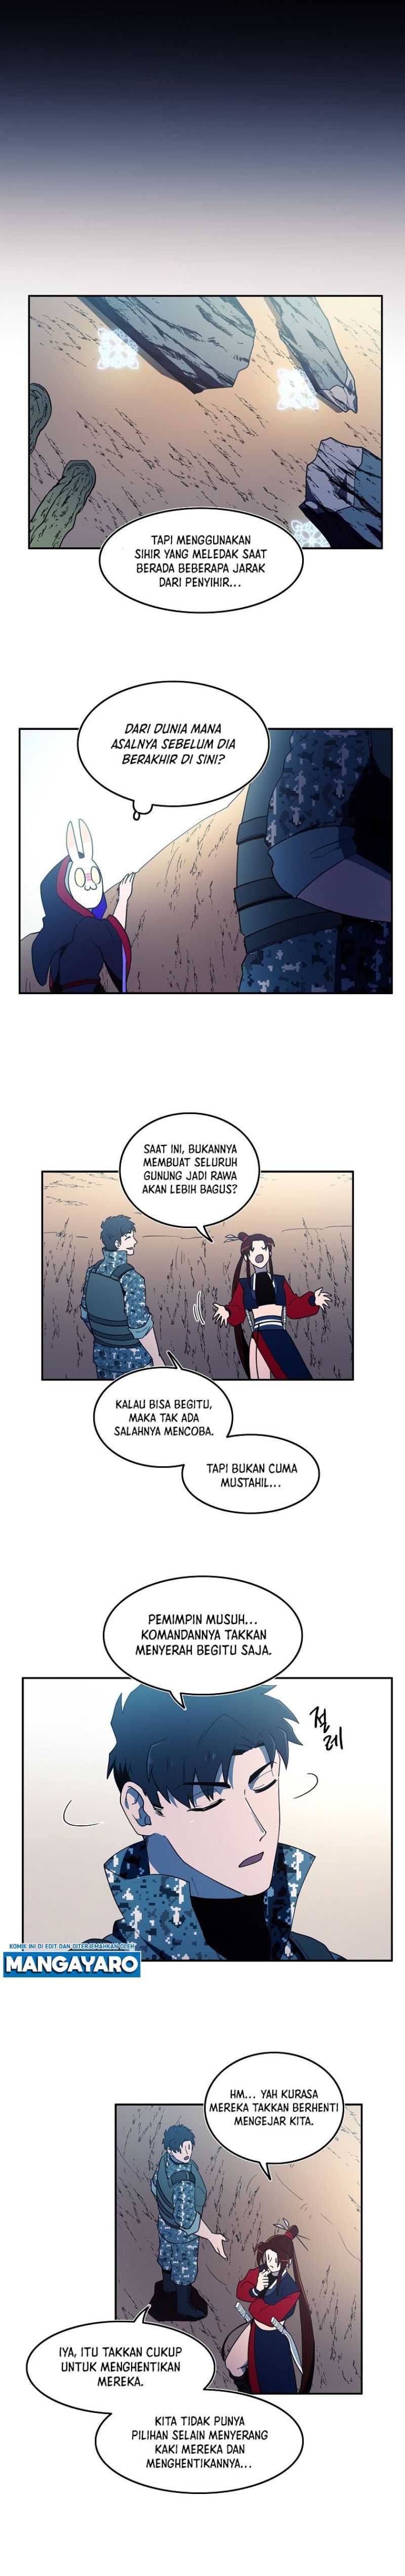 Magical Shooting : Sniper of Steel Chapter 44